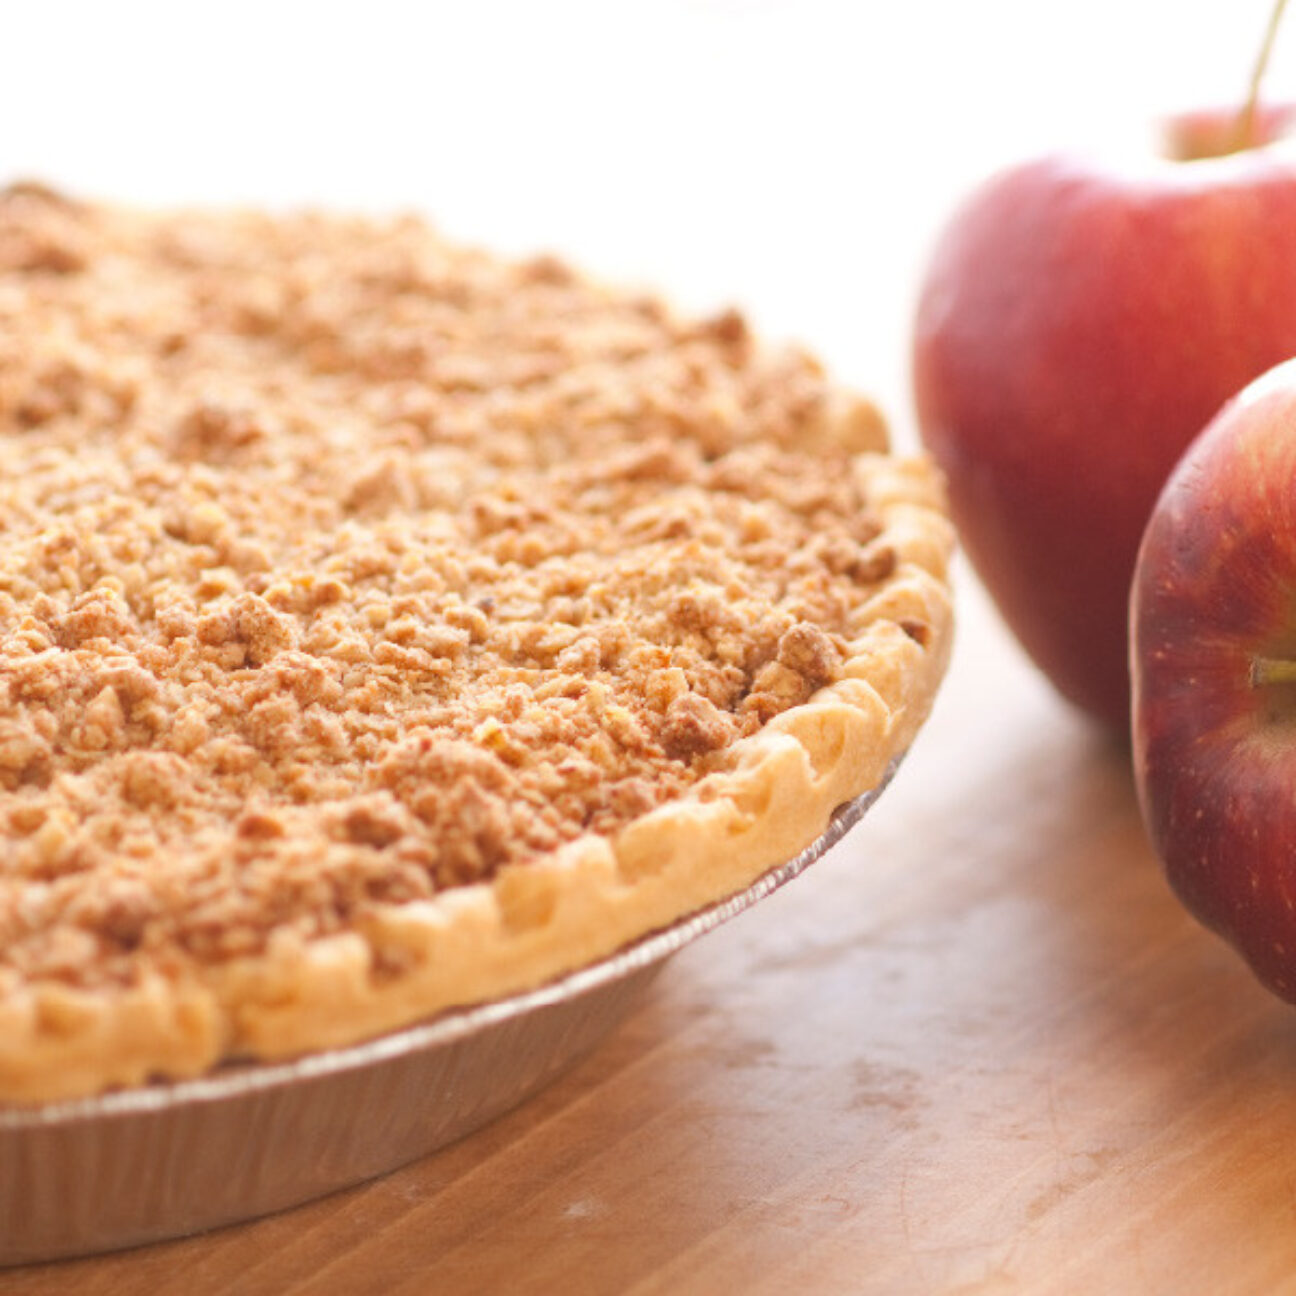 Liberally blended with cinnamon, sweet apples are cooked into a simple but delicious filling then baked in our homemade pie crusts. No artificial flavorings and colorings are used. Generously topped with crumbs for the 